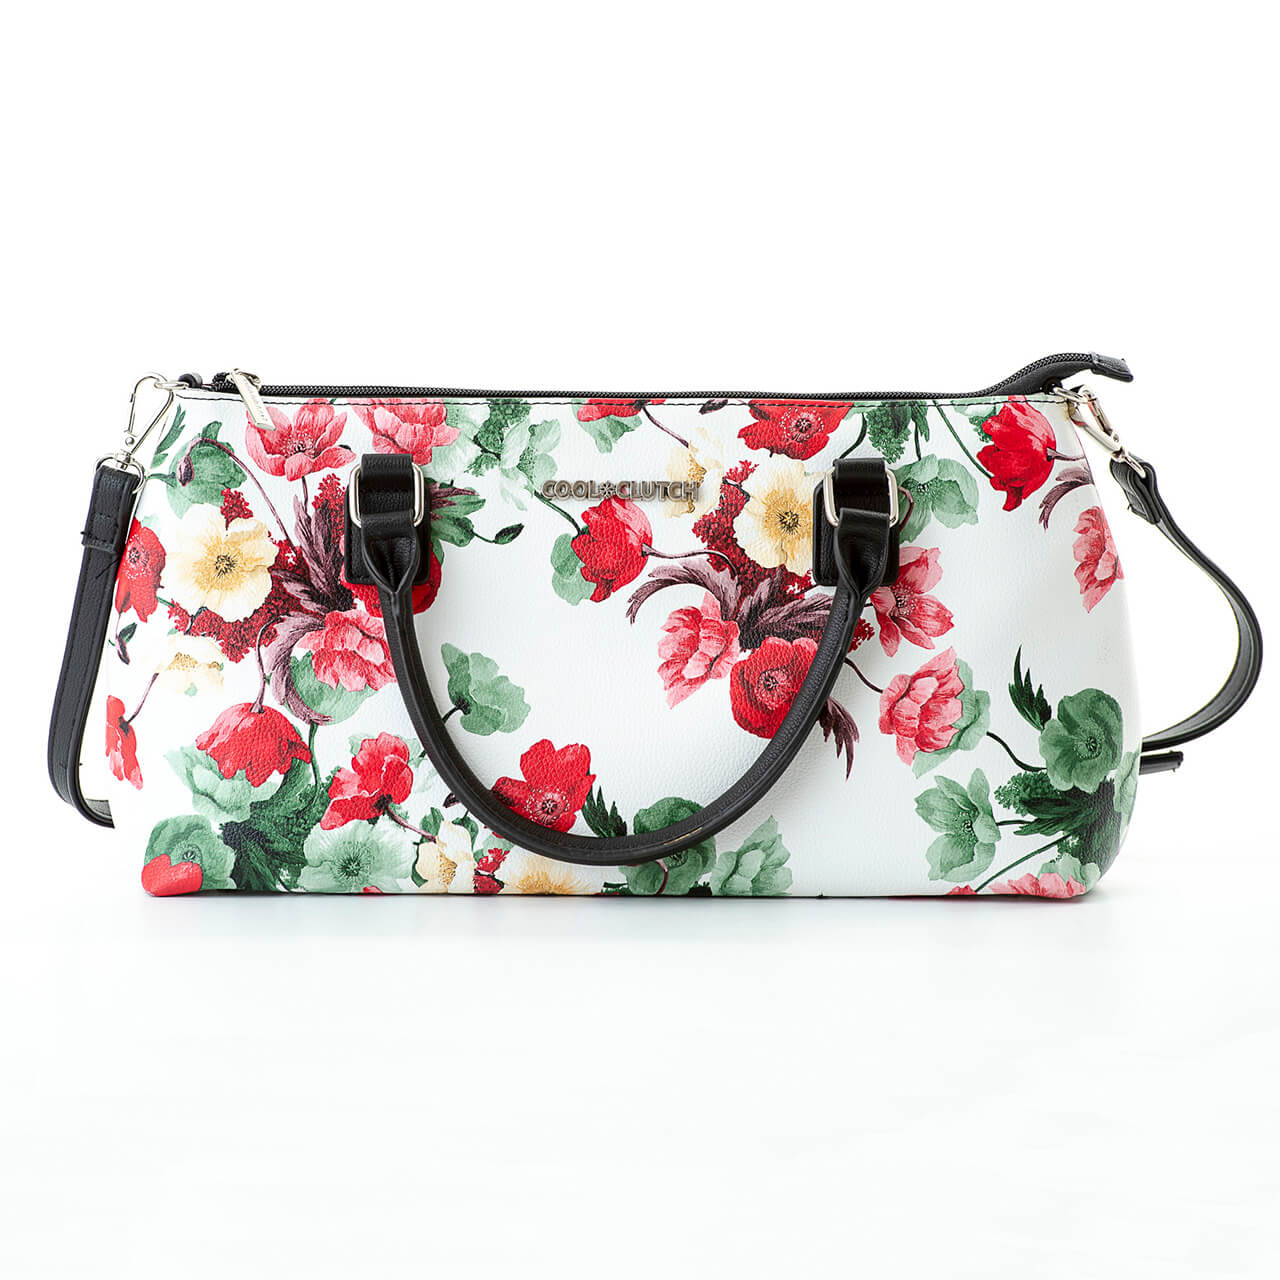 Rosemary Cool Clutch (Green & Red Flowers) Cooler bags - Cool Clutch cooler bag handbag insulated wine lunch handbags